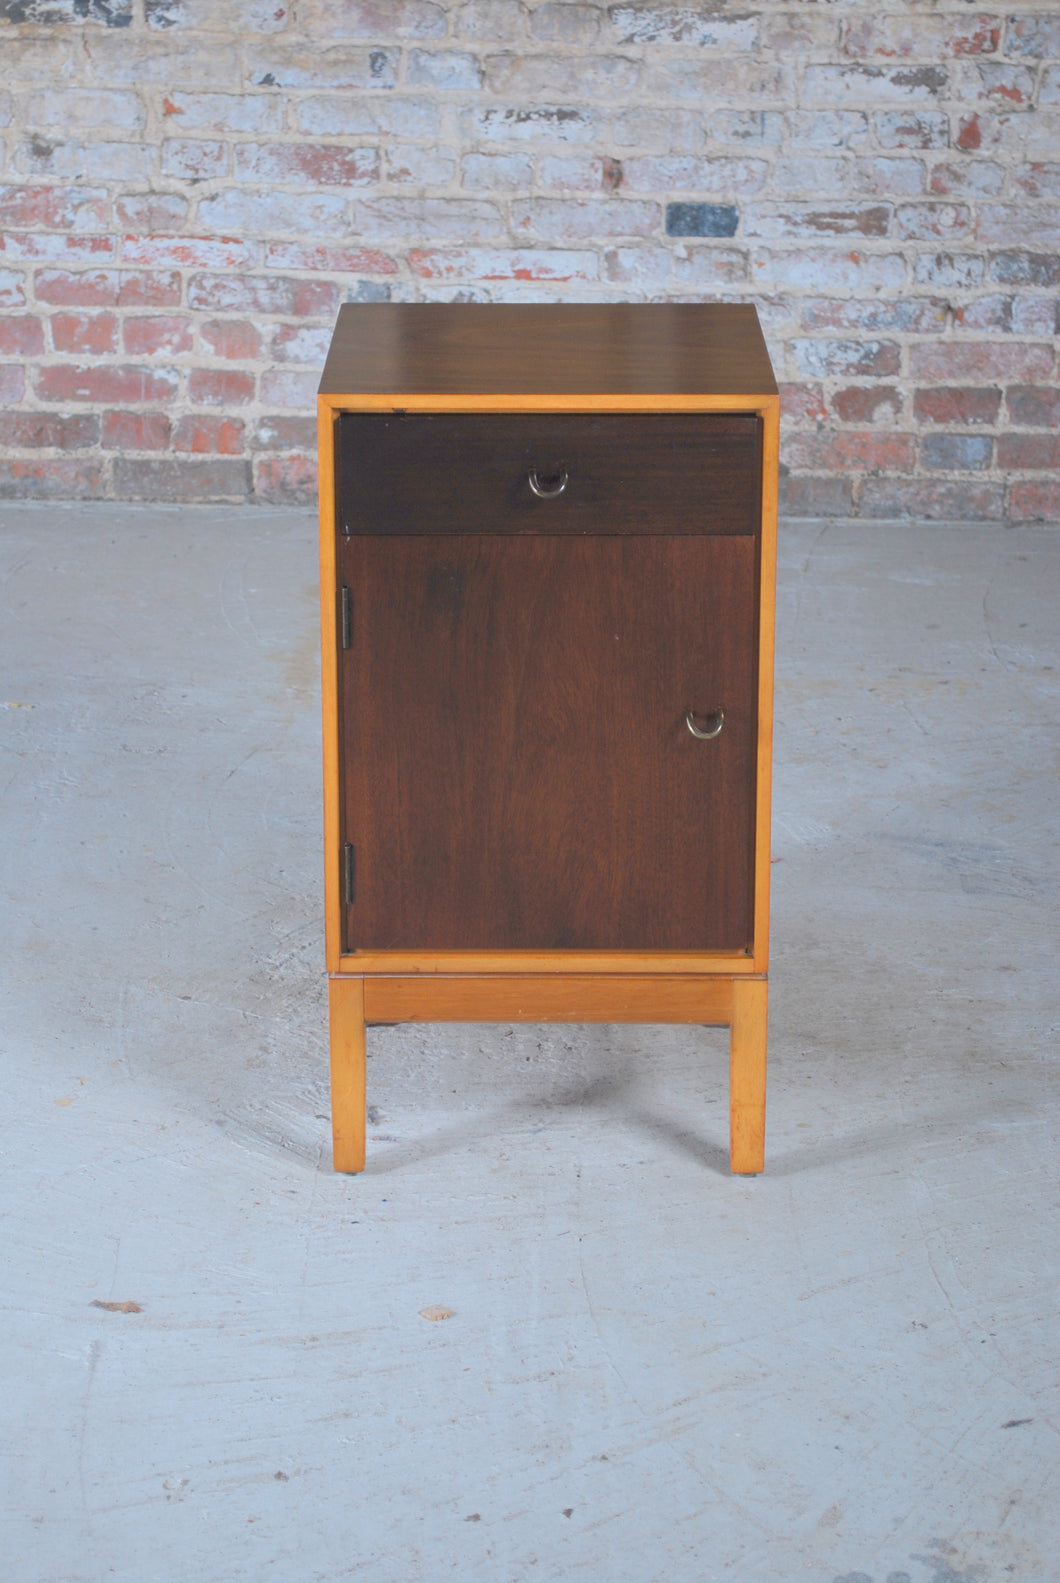 British Mid Century walnut bedside table by John and Sylvia Reid for Stag, circa 1960s.